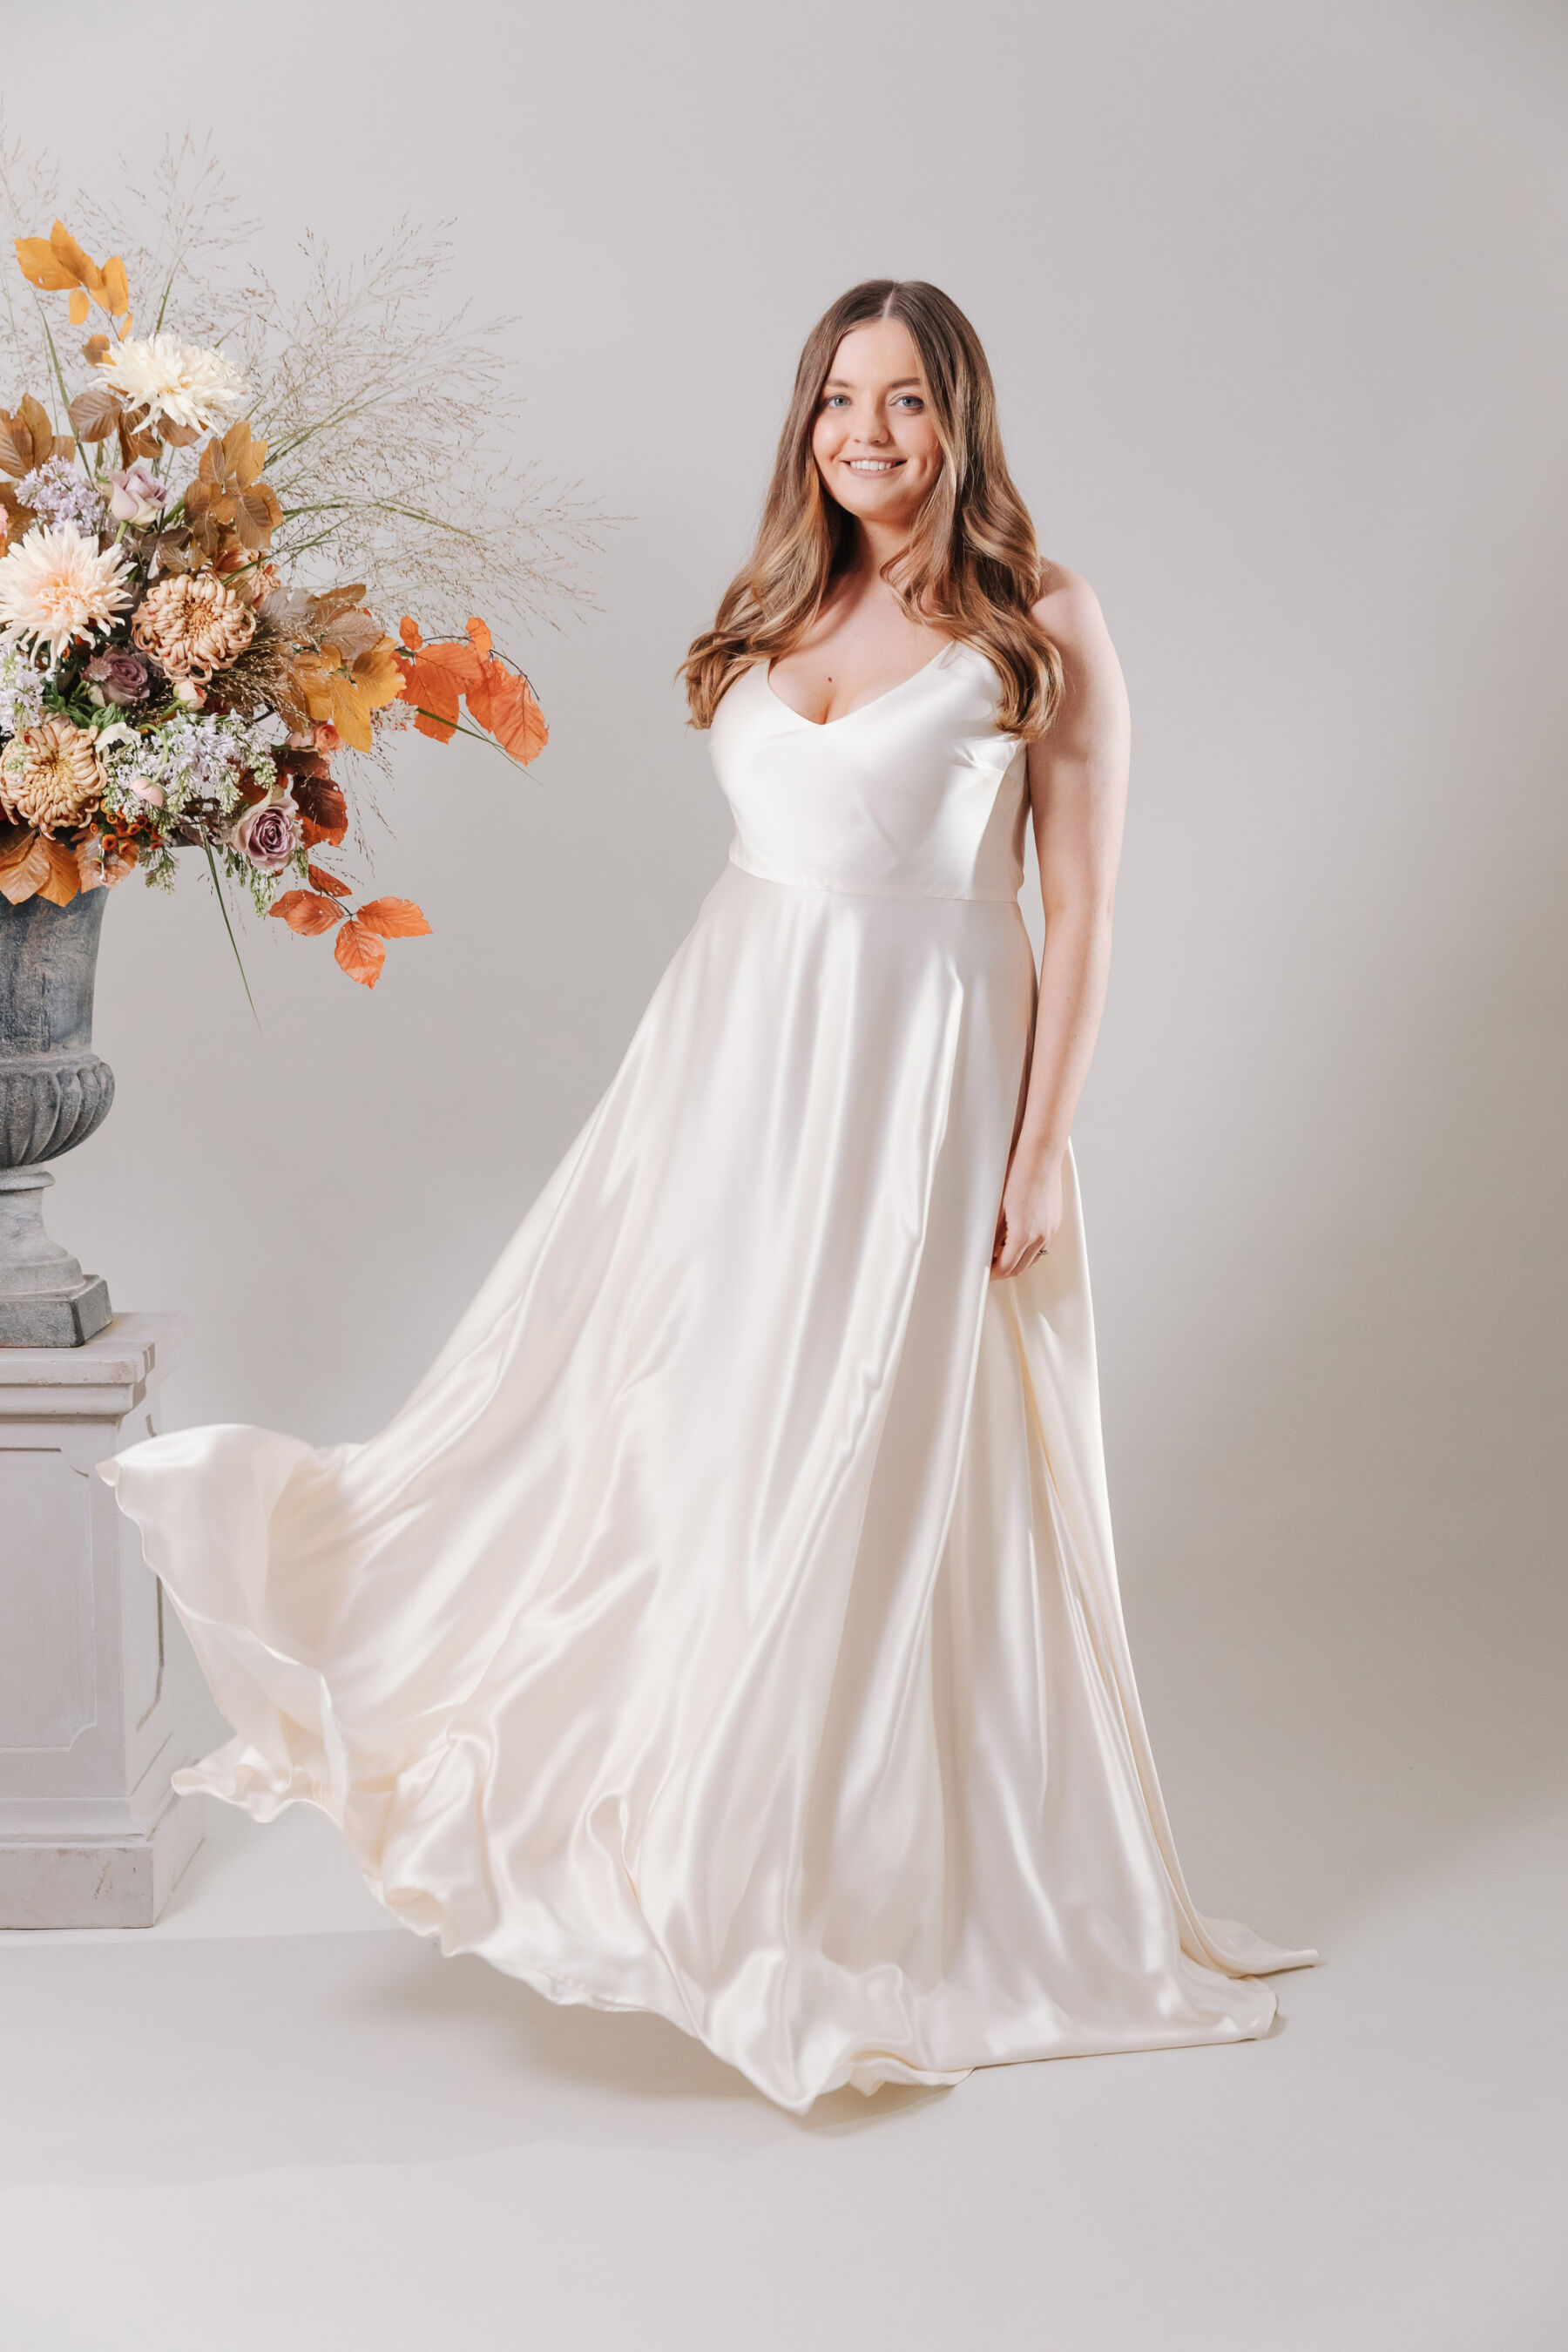 Kate Beaumont sustainable wedding dress for curvy brides. Bridal gown for fuller figured women.